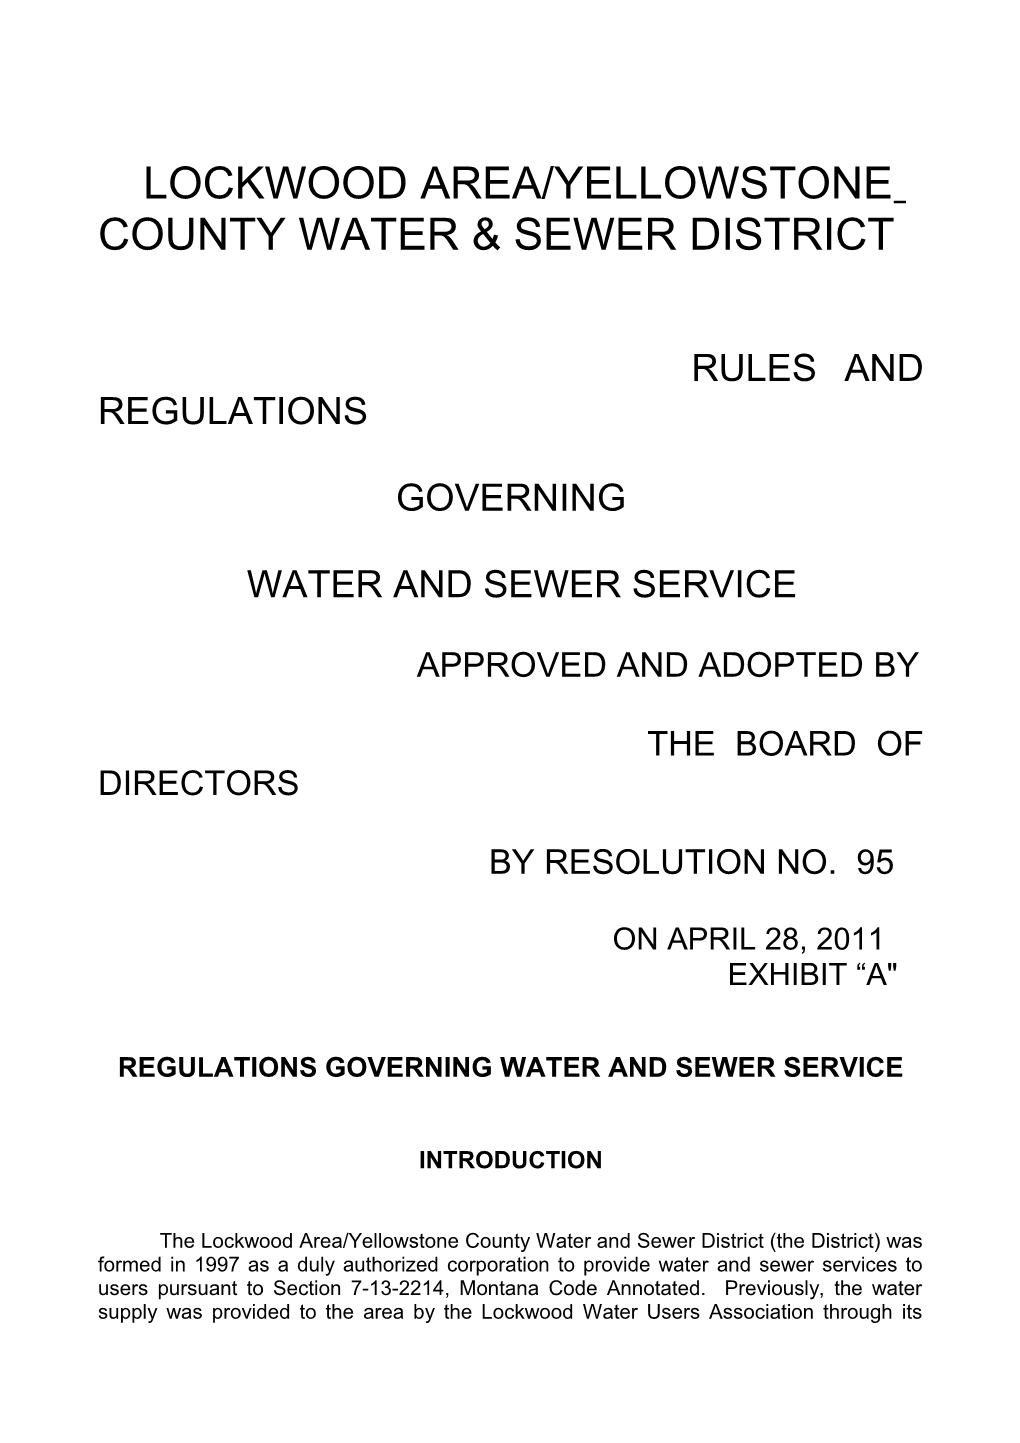 Lockwood Area/Yellowstone County Water & Sewer District